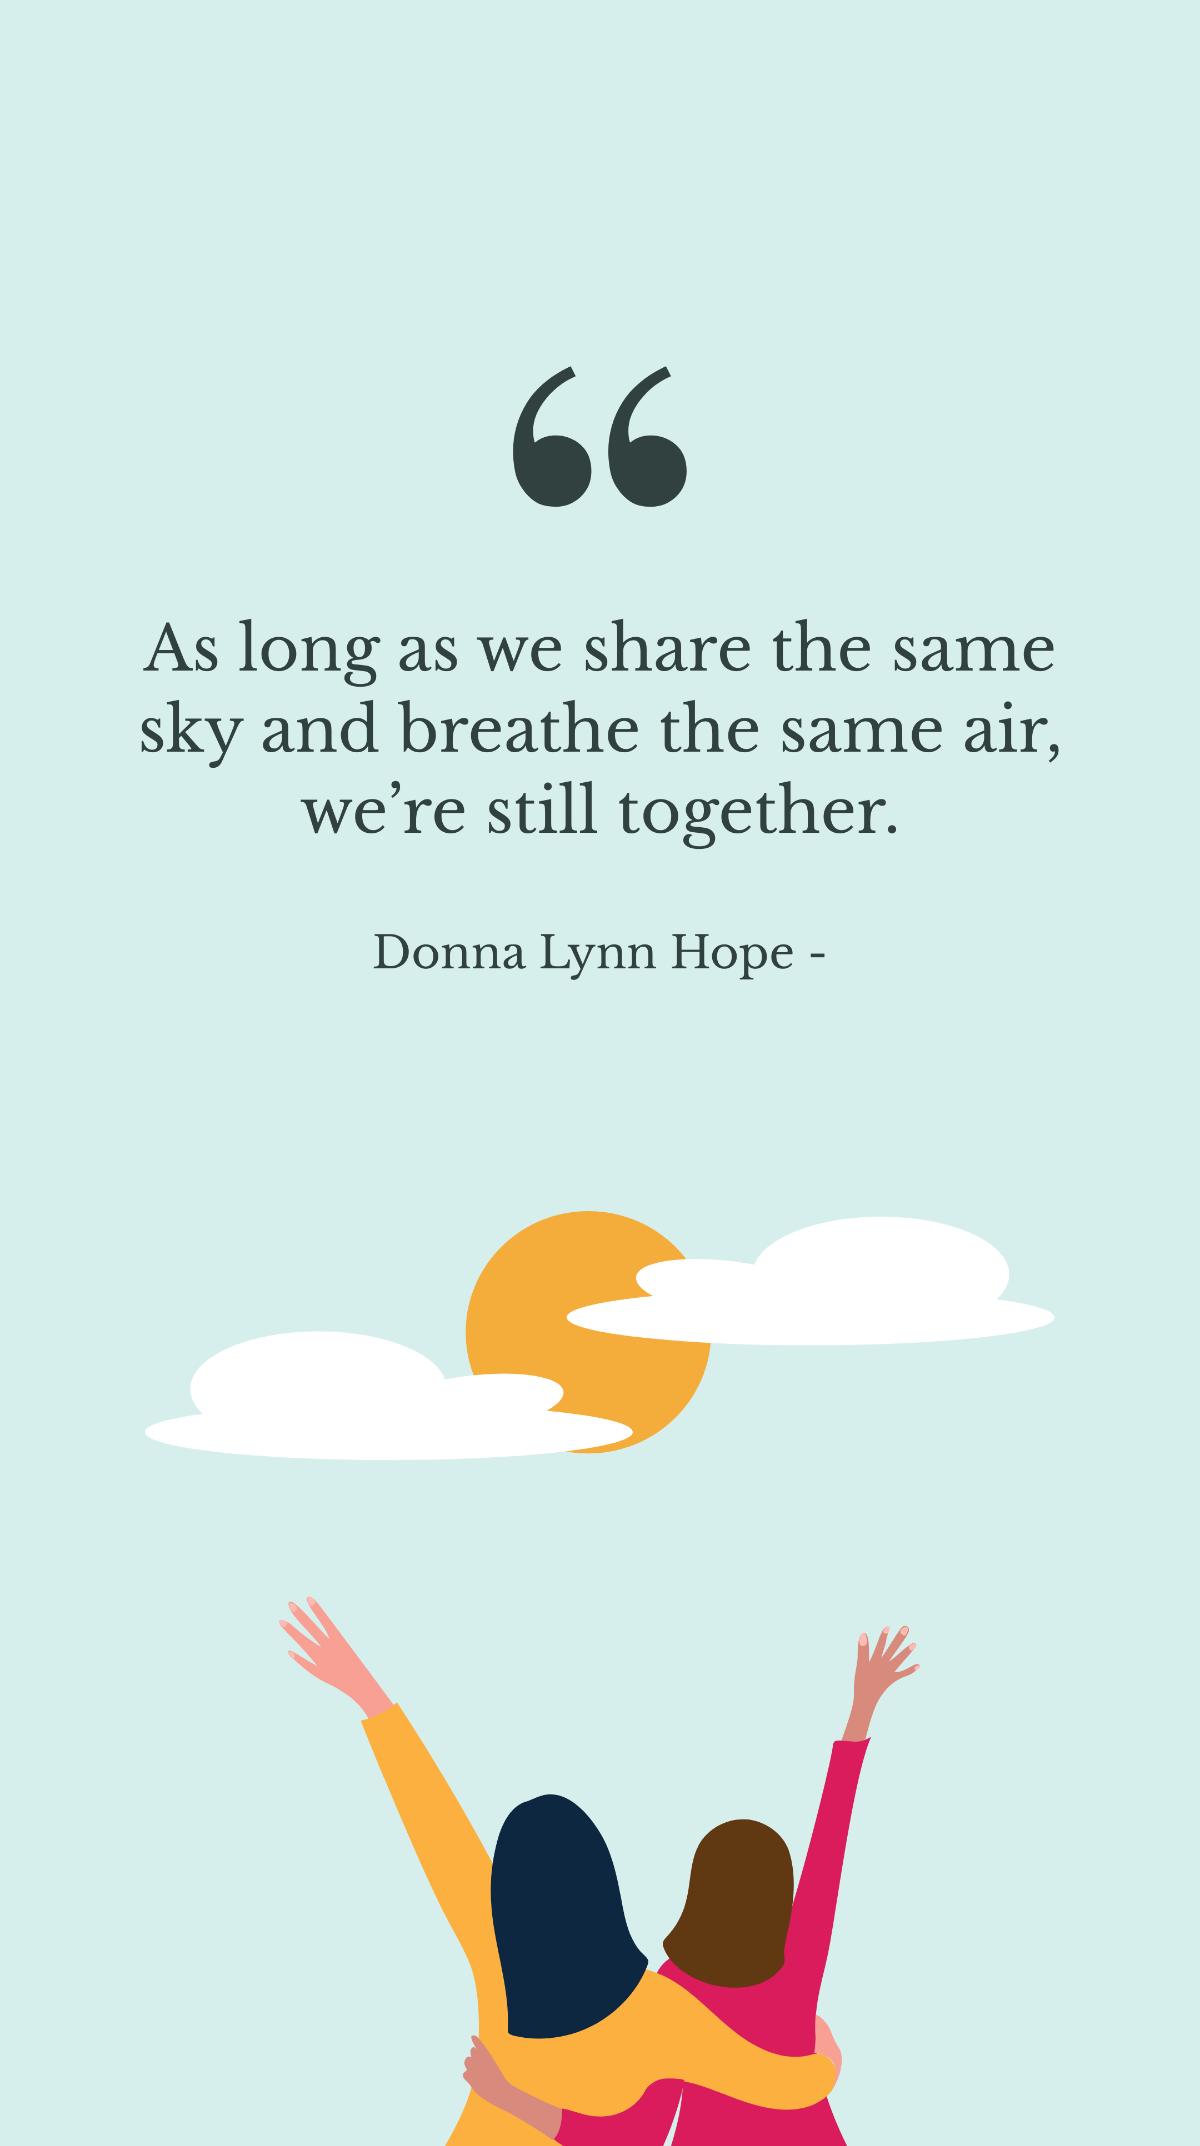 Donna Lynn Hope - As long as we share the same sky and breathe the same air, we’re still together. Template